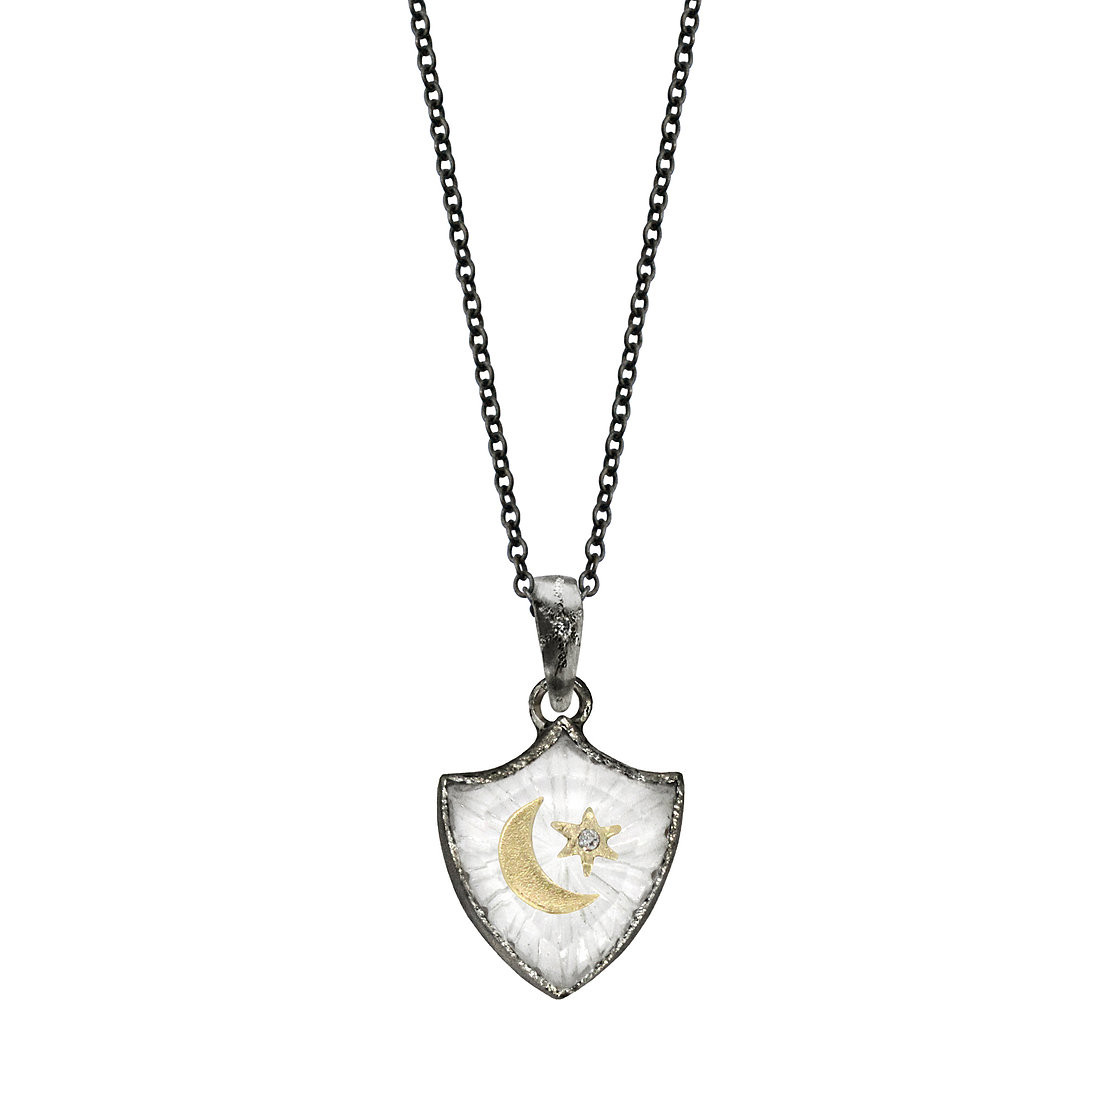 Crescent Star small shield amulet necklace by Acanthus available to shop online at tomfoolery London | www.tomfoolerylondon.co.uk